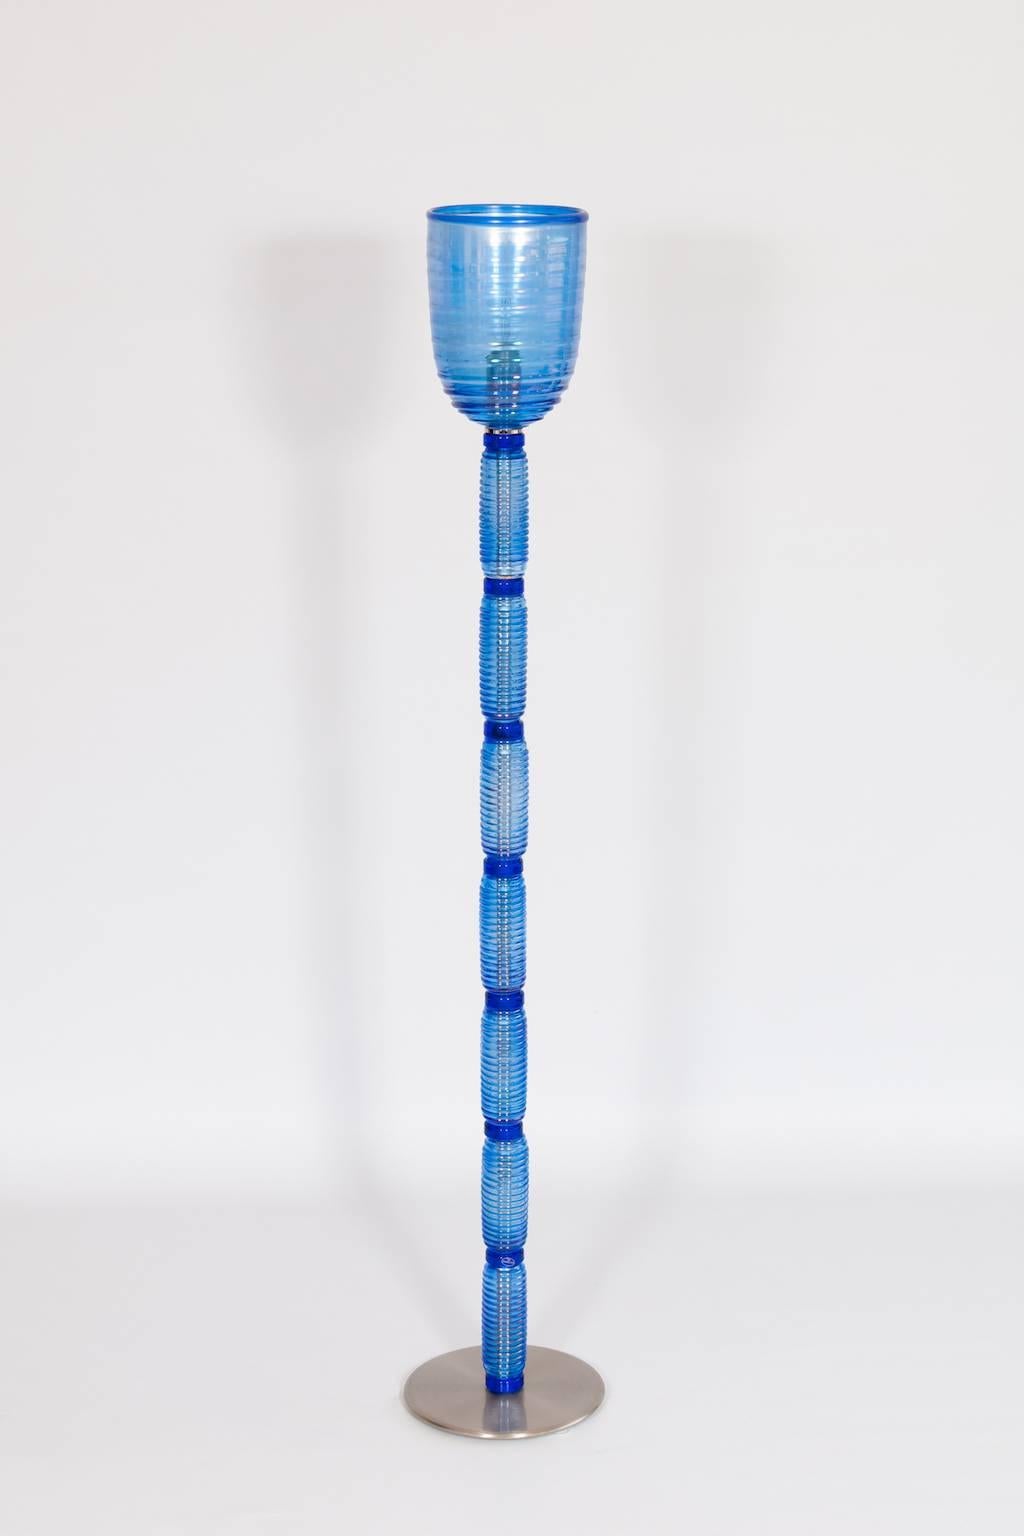 Floor Lamp in Light Blue and Iridescent Color Murano Glass Italy 1990s.
This is an exquisite modern floor lamp entirely handcrafted in the Venetian island of Murano in the 1990s. It is composed by a chromed round base, by a light-blue stem made of